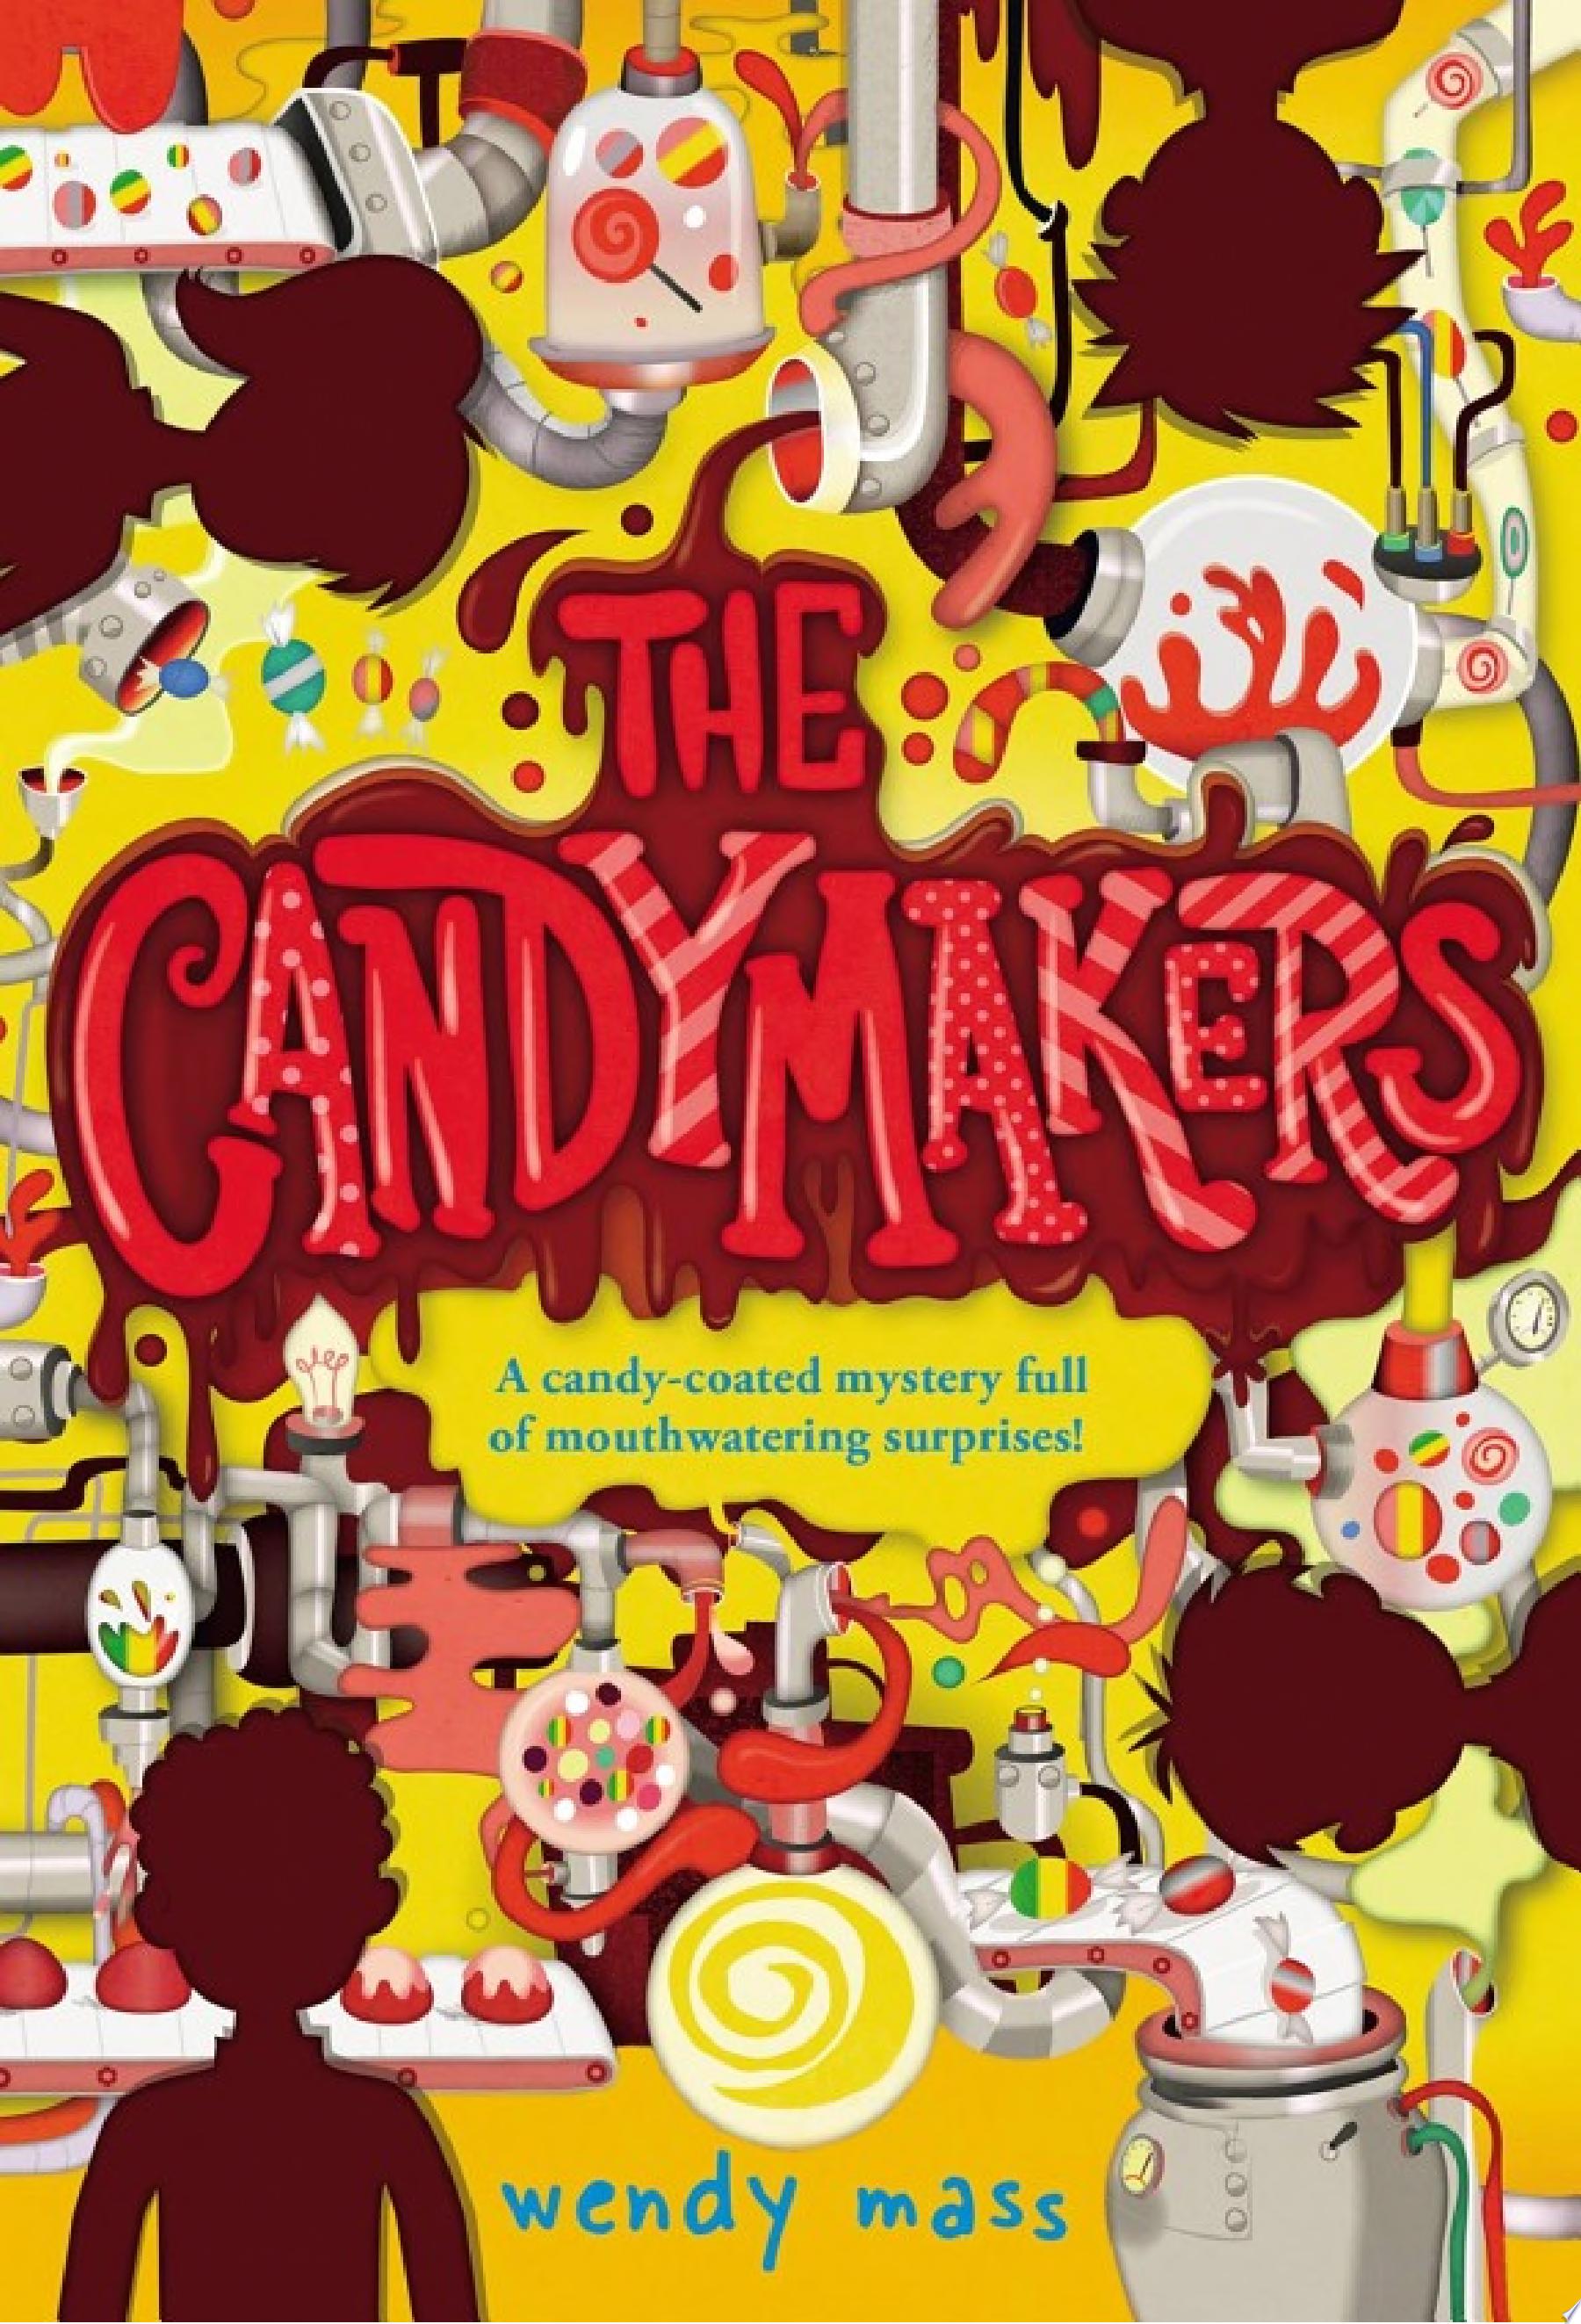 Image for "The Candymakers"